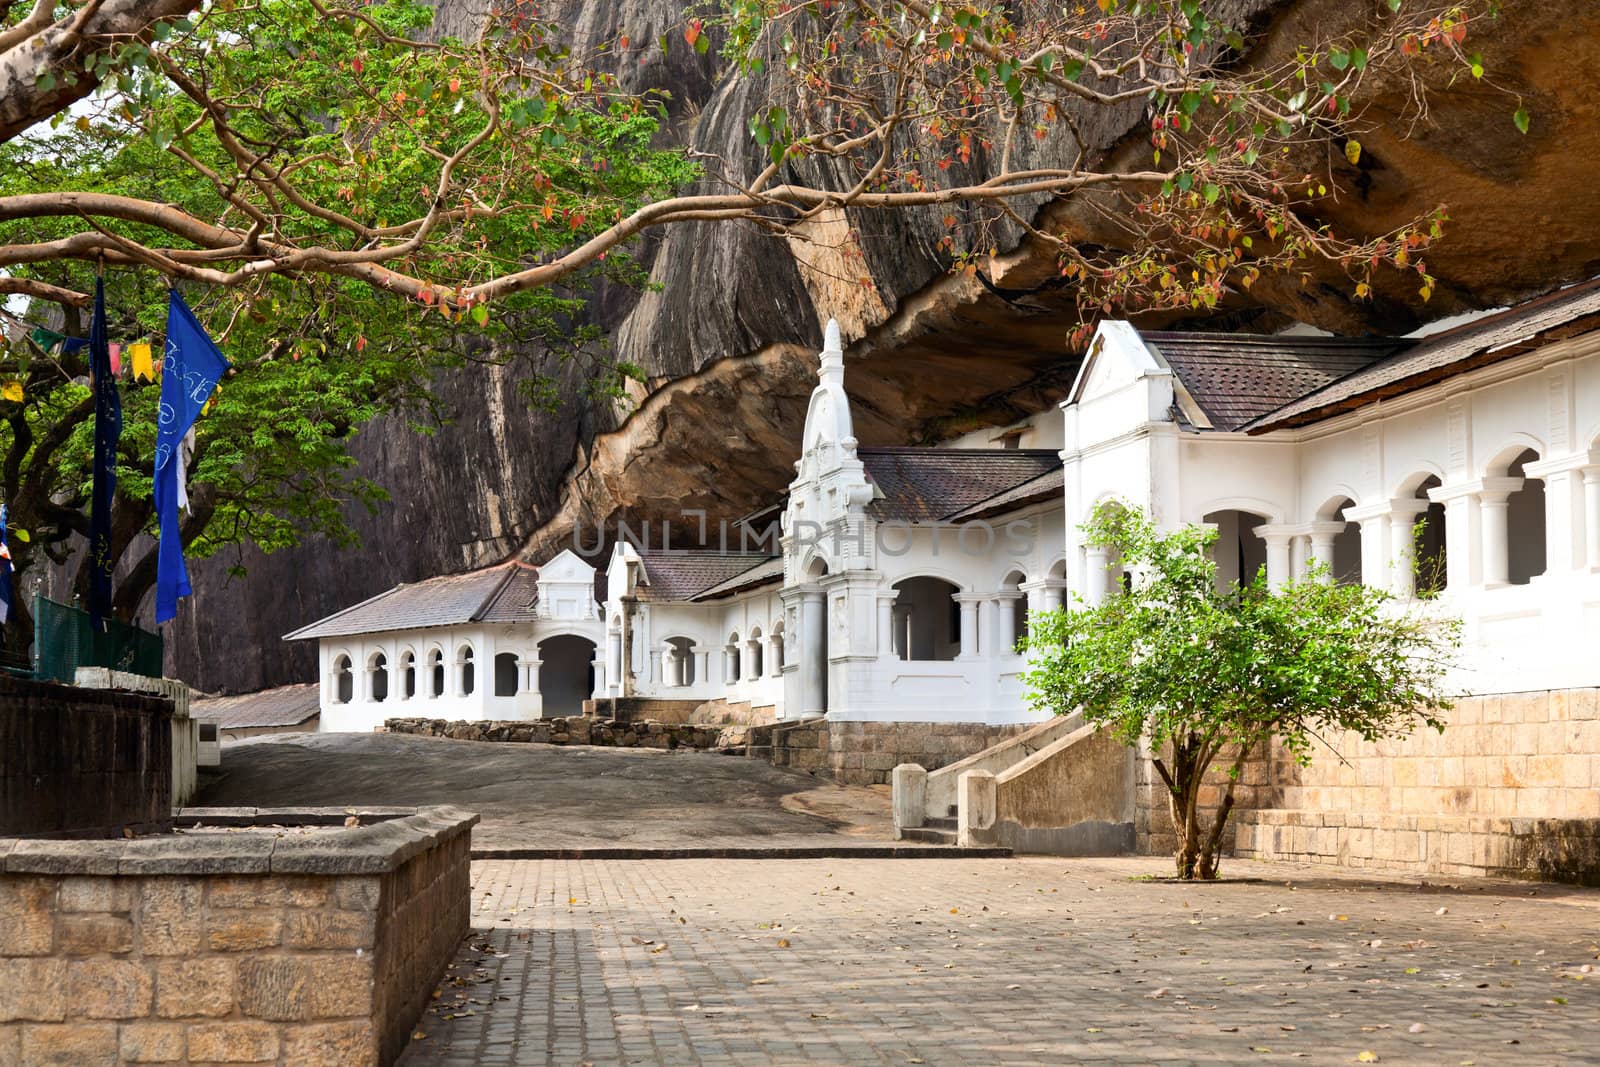 Dambulla cave temple, the largest and best-preserved cave temple complex in Sri Lanka